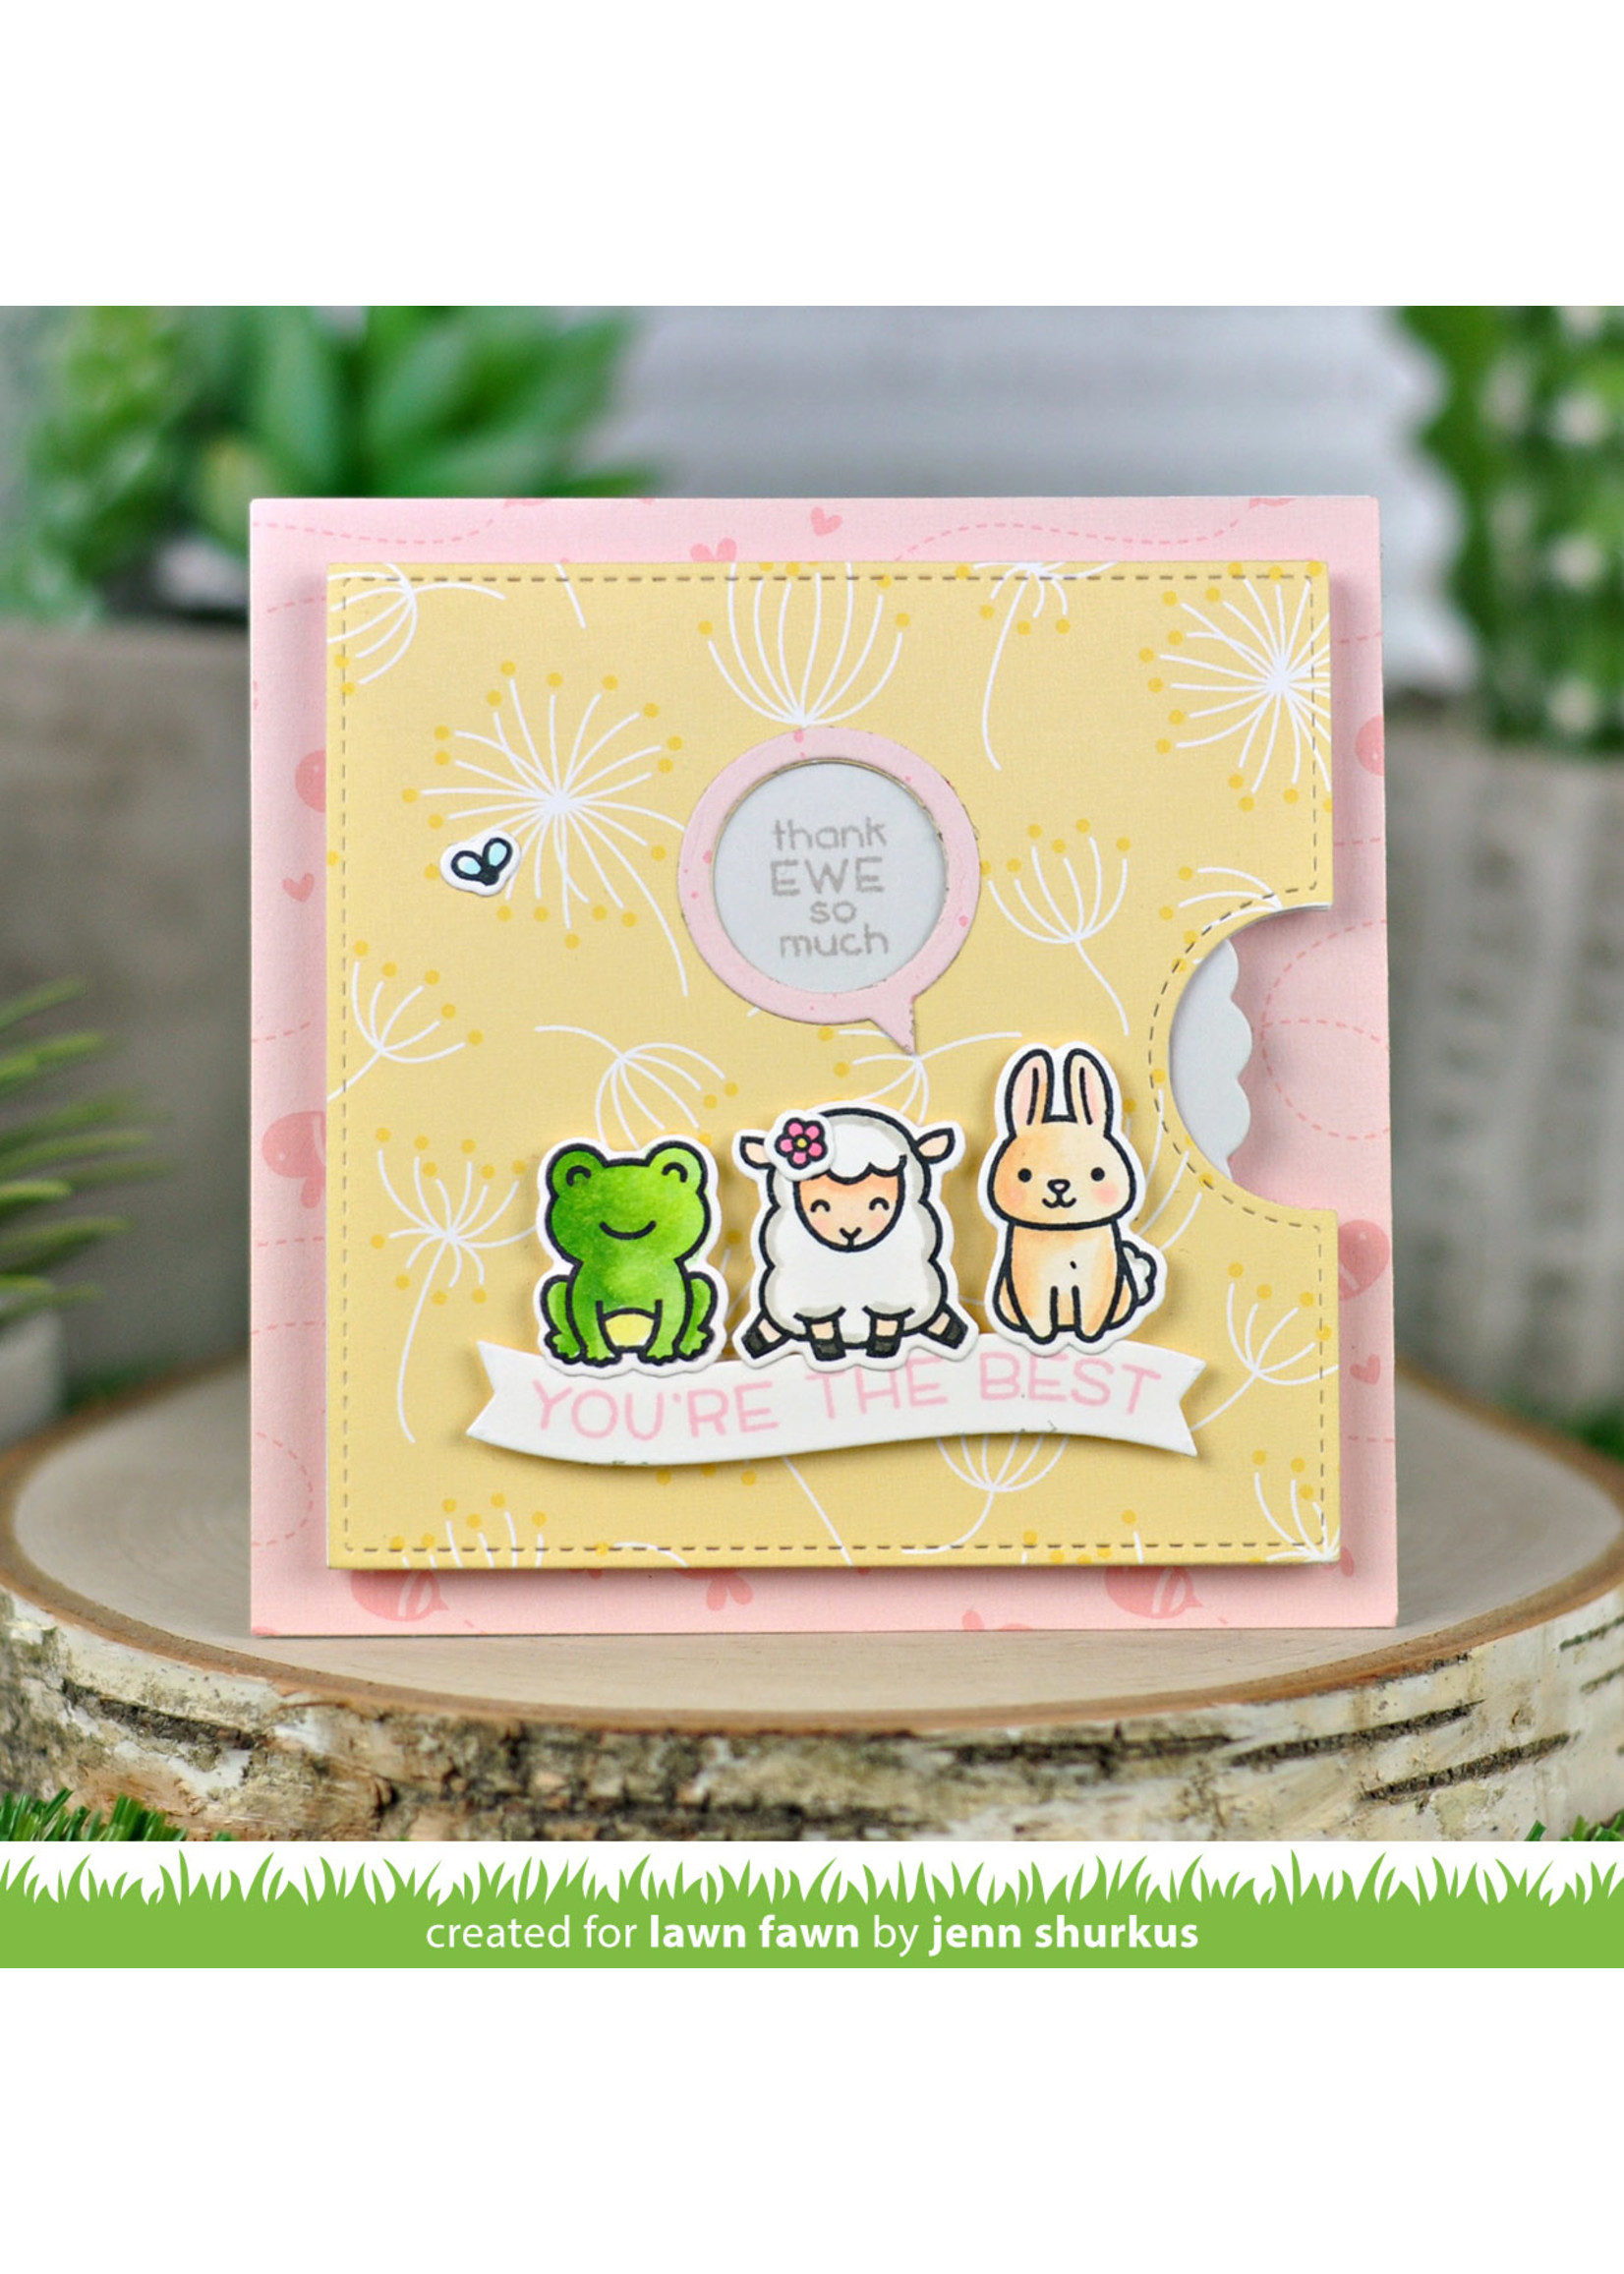 Lawn Fawn Dies reveal wheel circle add-on frames: balloon and speech bubble